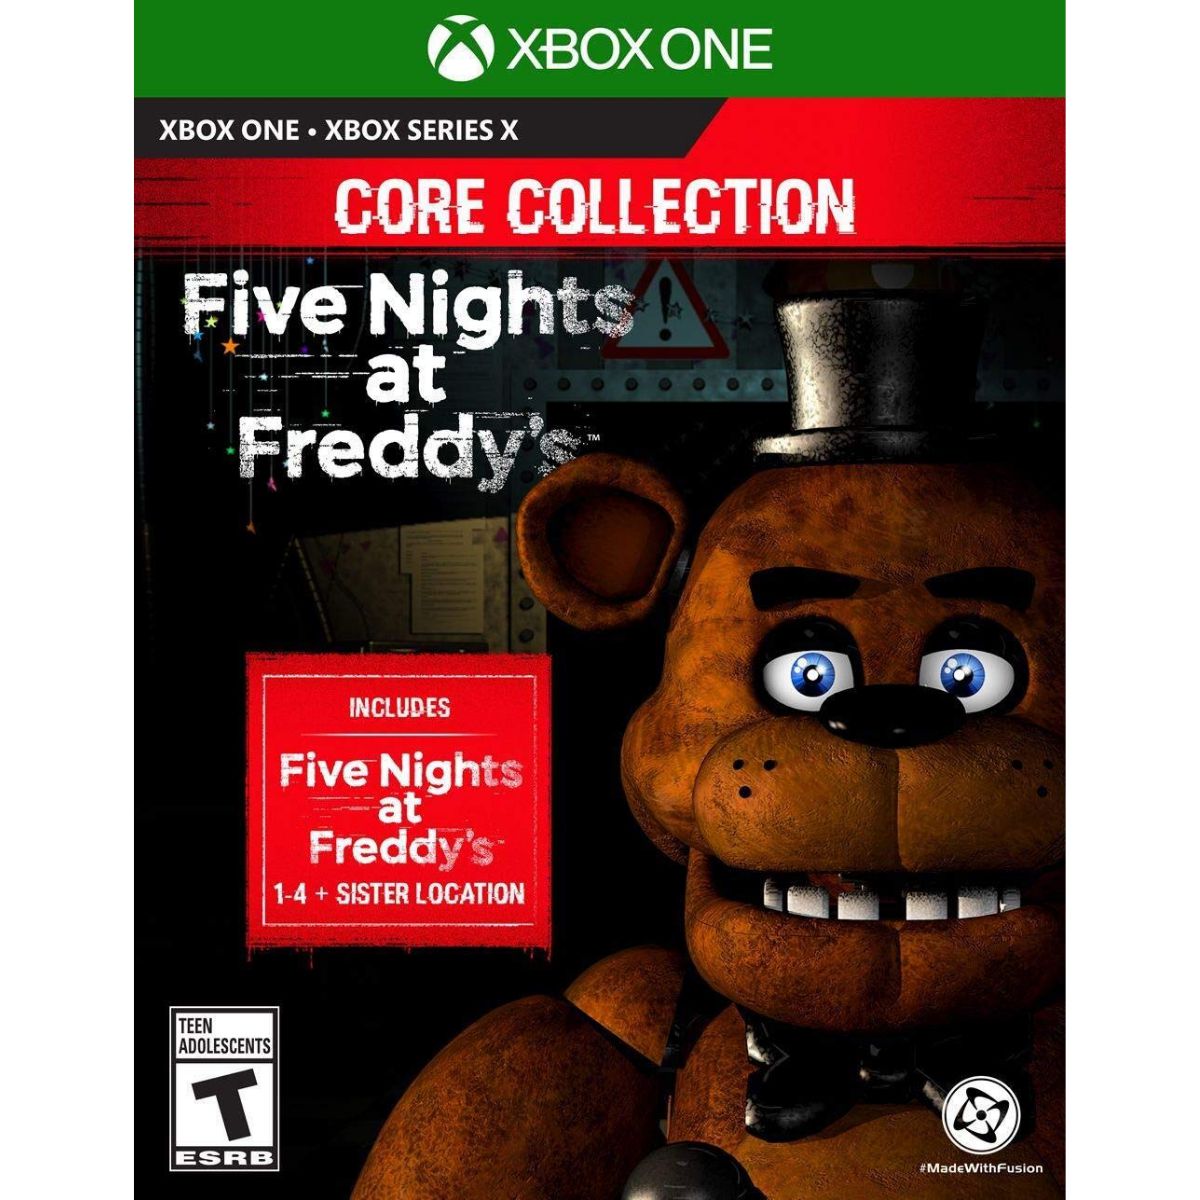 Five Nights at Freddy's Security Breach Xbox One, Series X - Game Games -  Loja de Games Online